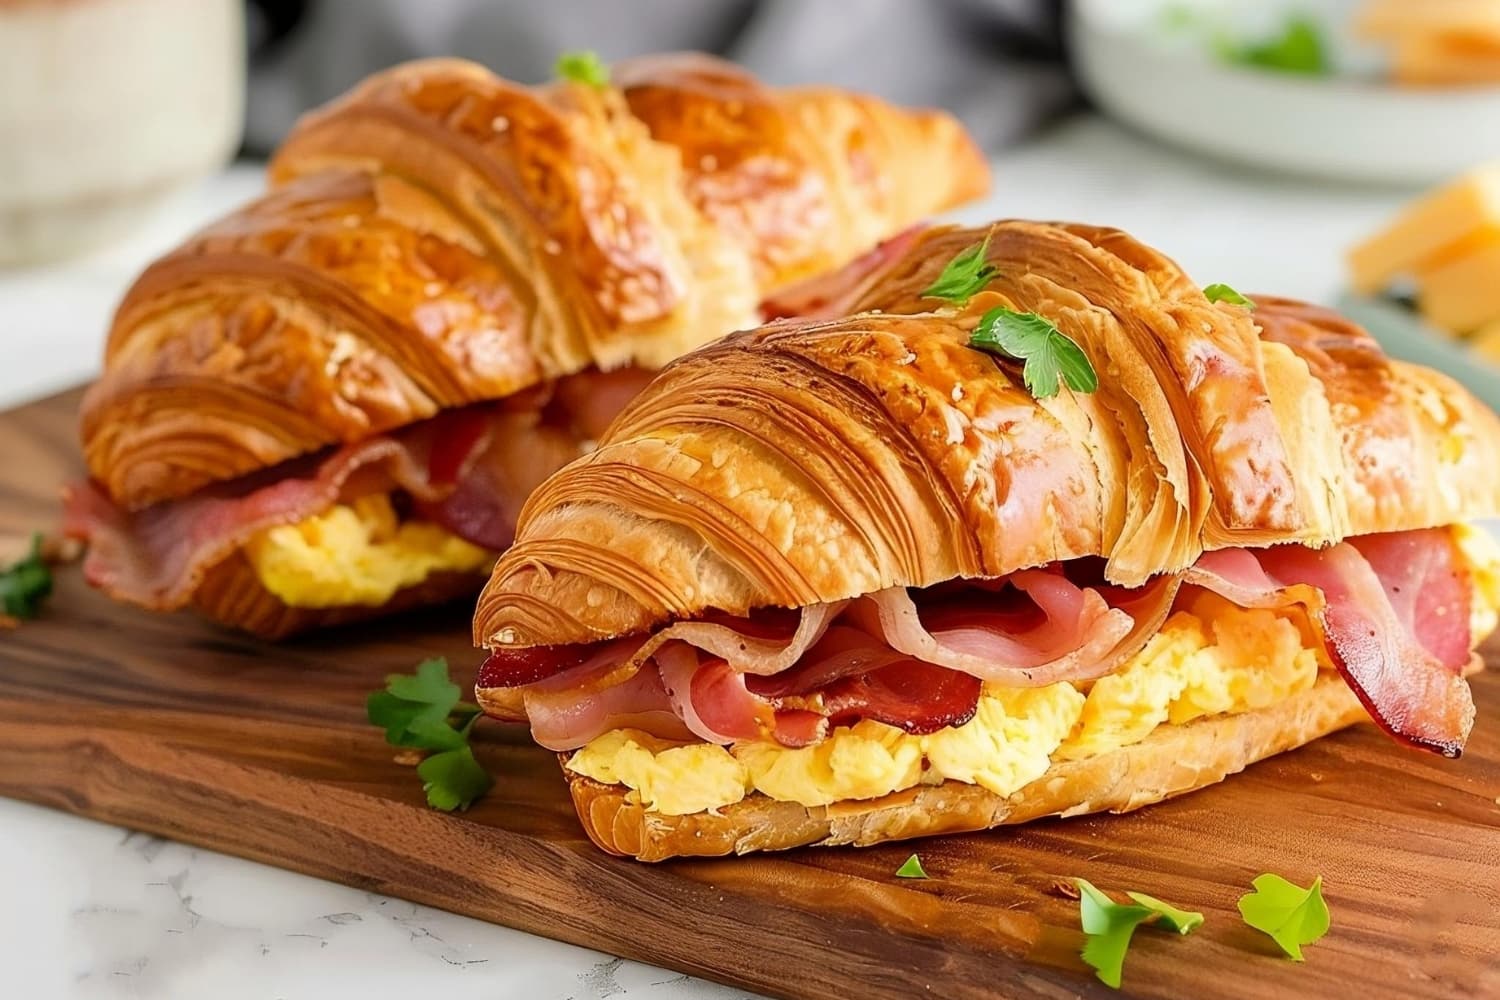 Breakfast croissant sandwich with bacon and egg in a wooden board